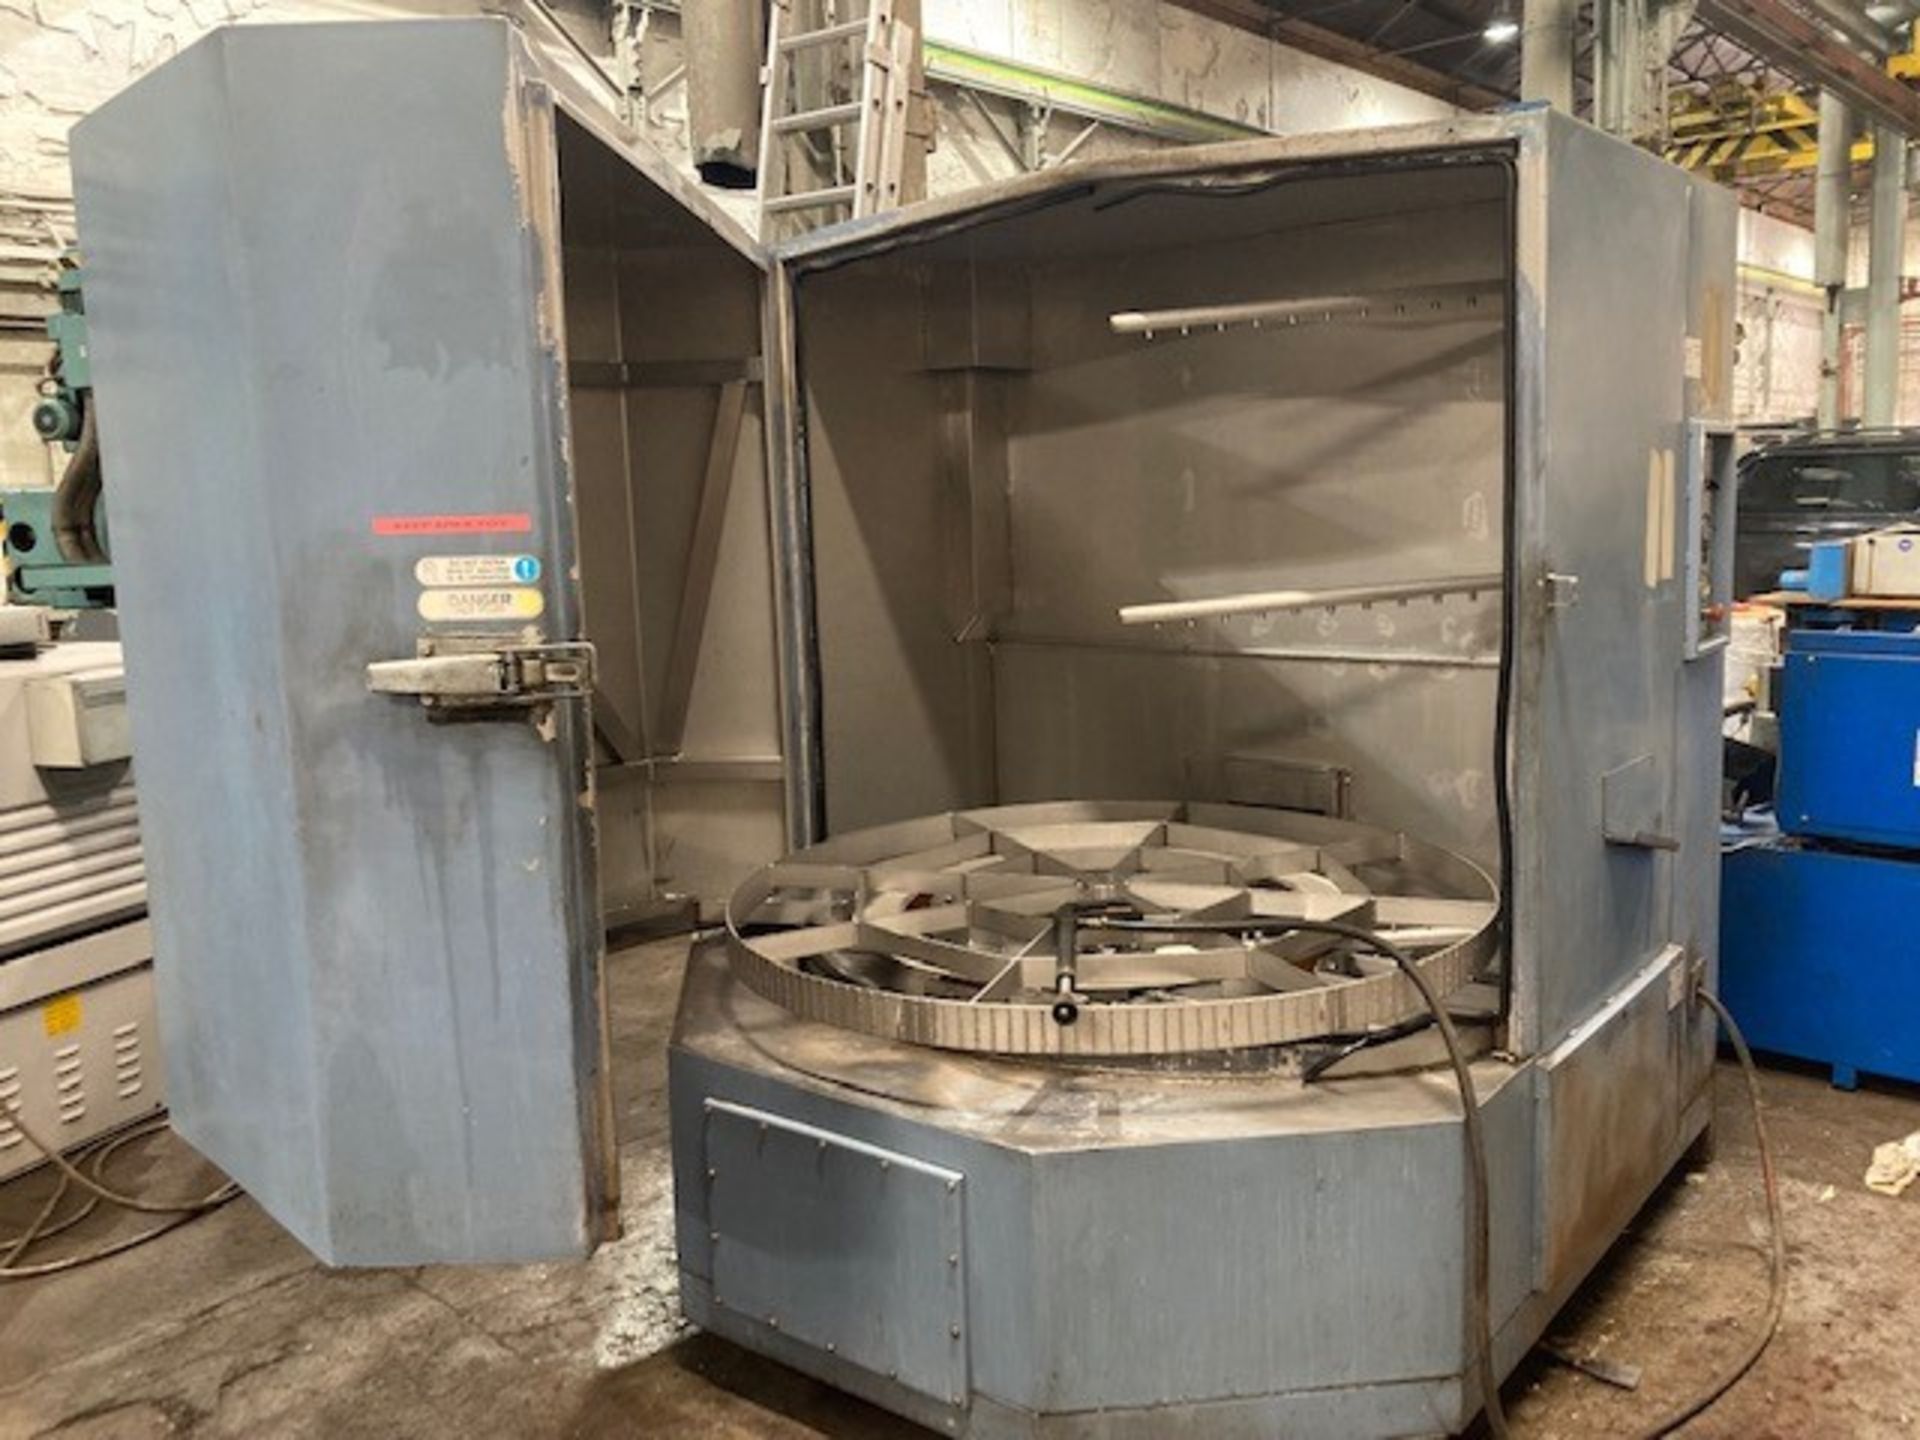 Vixen CL-1500 Large Component washing and degreasing Jetwash Carousel